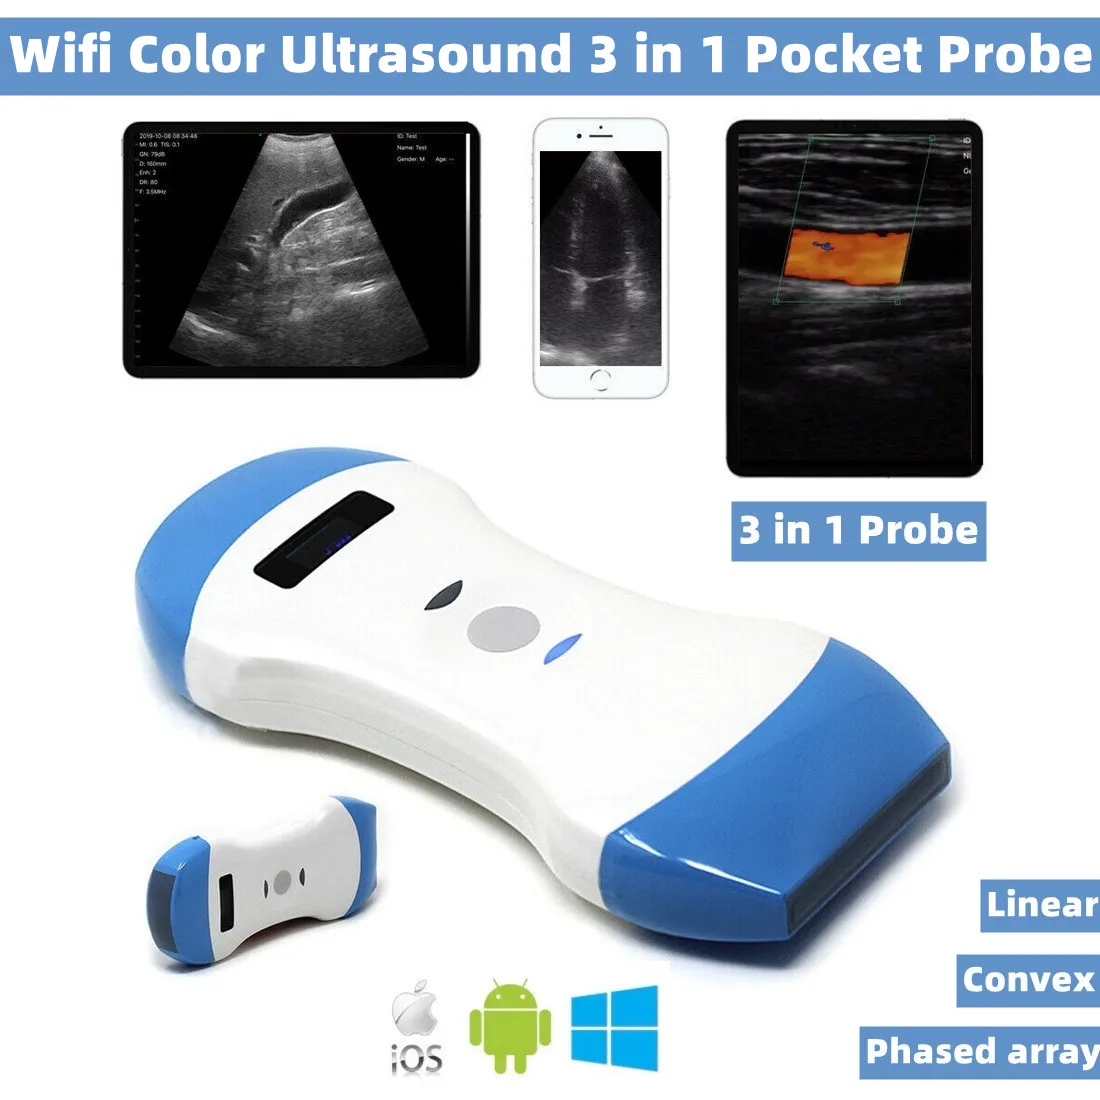 

Wifi Wireless Color Ultrasound 3 in 1 Probe 3.5MHz / 5MHz Convex / 7.5MHz Linear Probe support iOS Android Windows